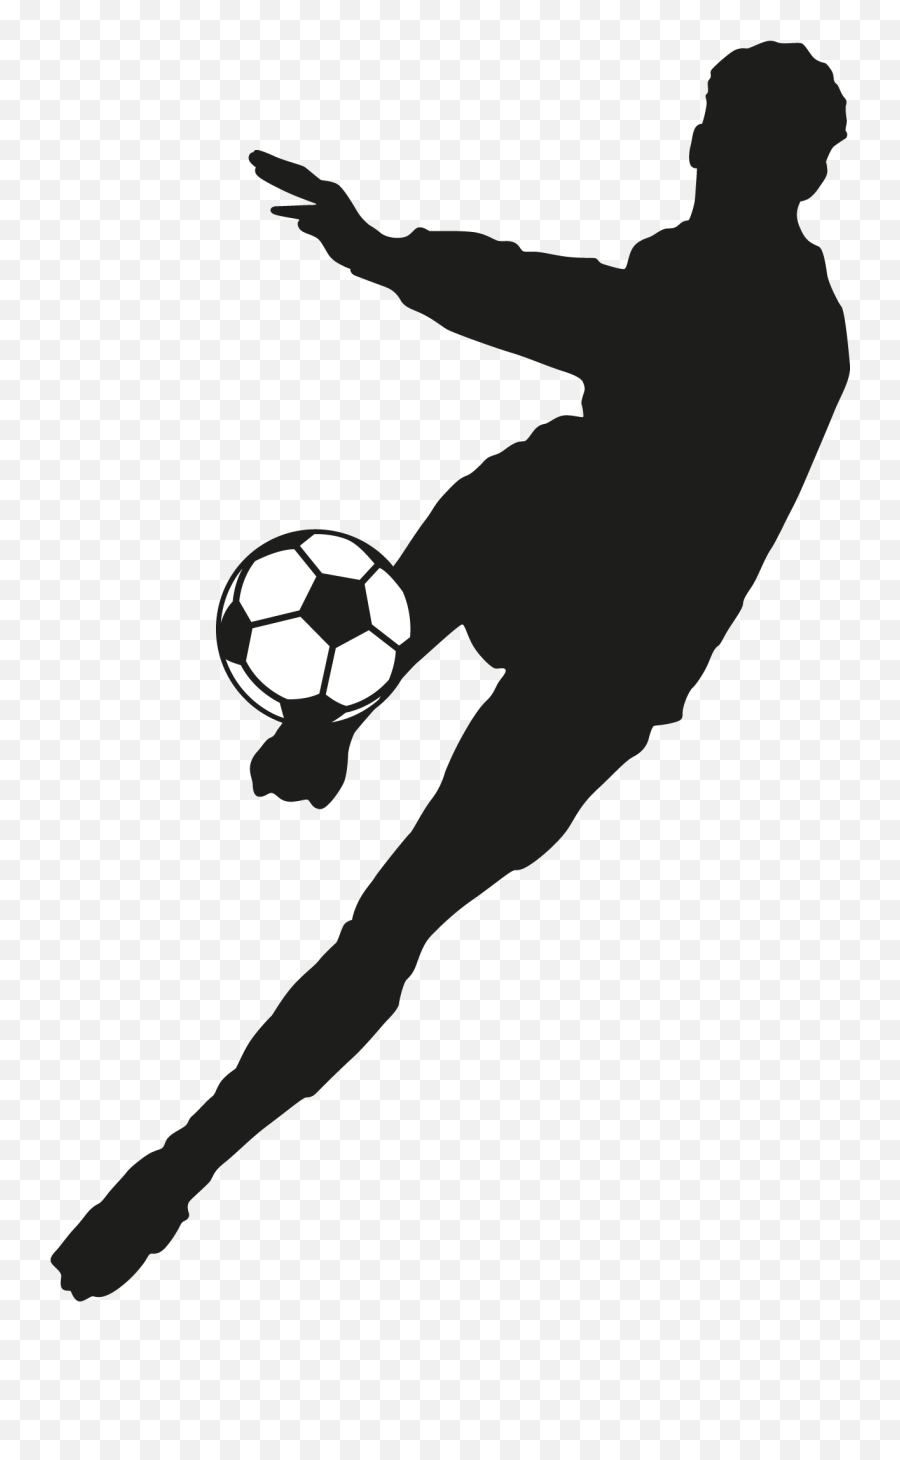 Football Player Silhouette - Football Player Silhouette Png Emoji,Football Player Emoji